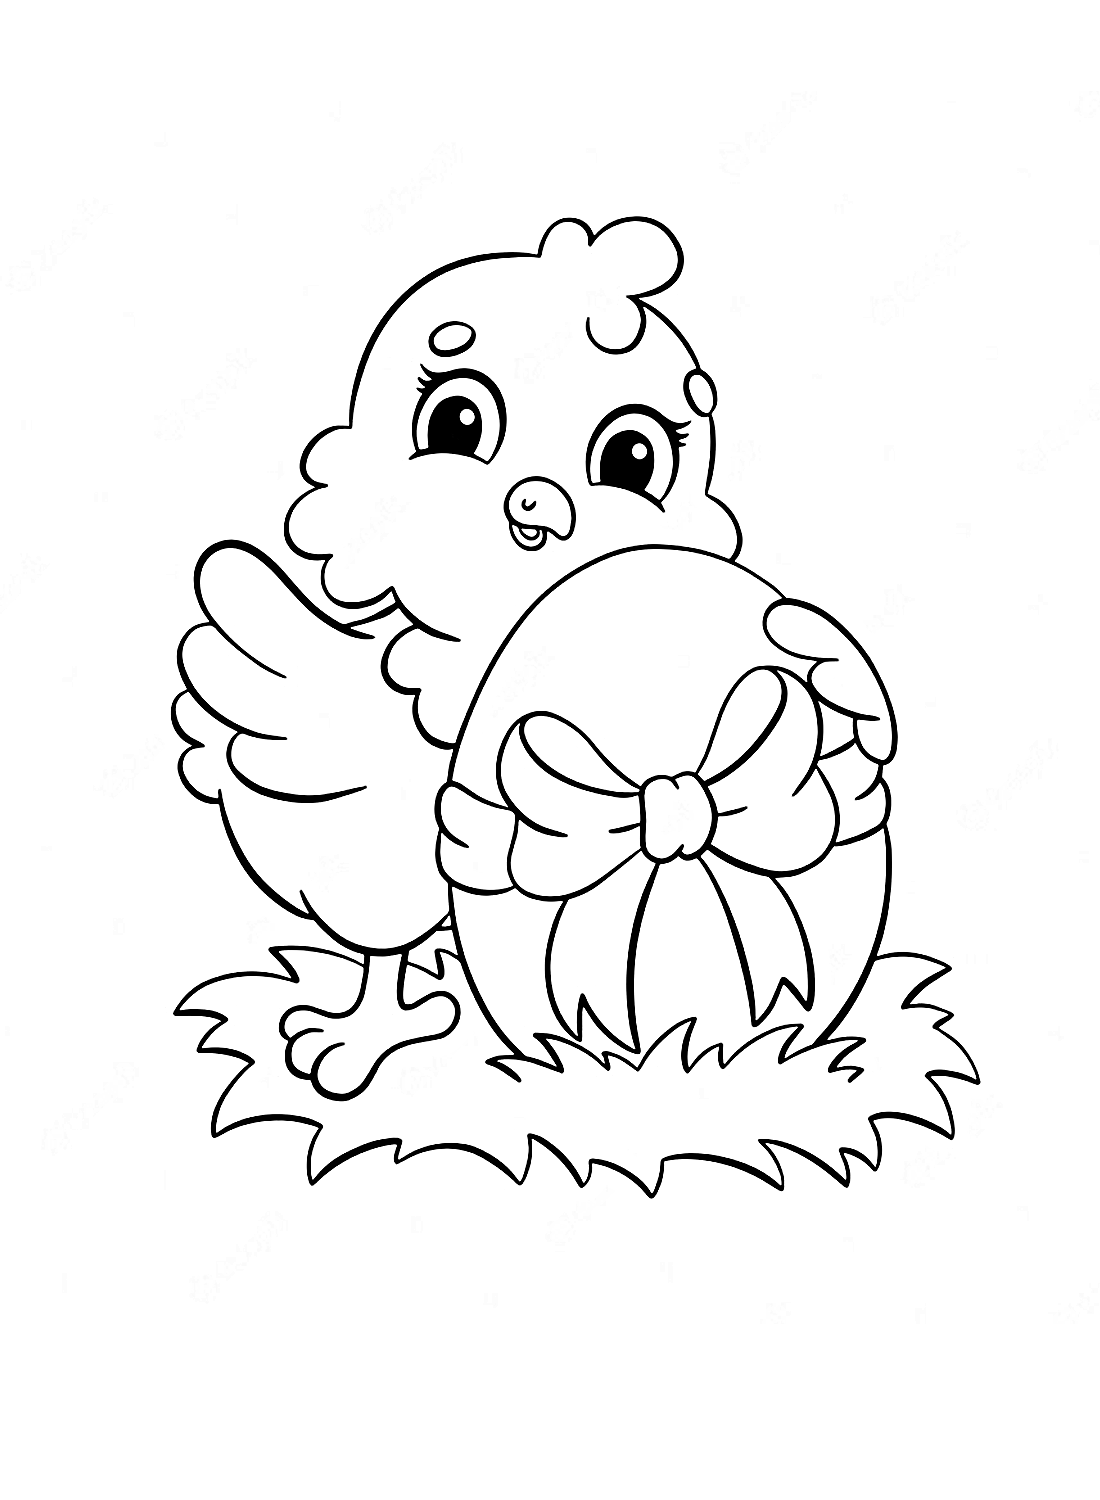 A chick and an egg Coloring Pages